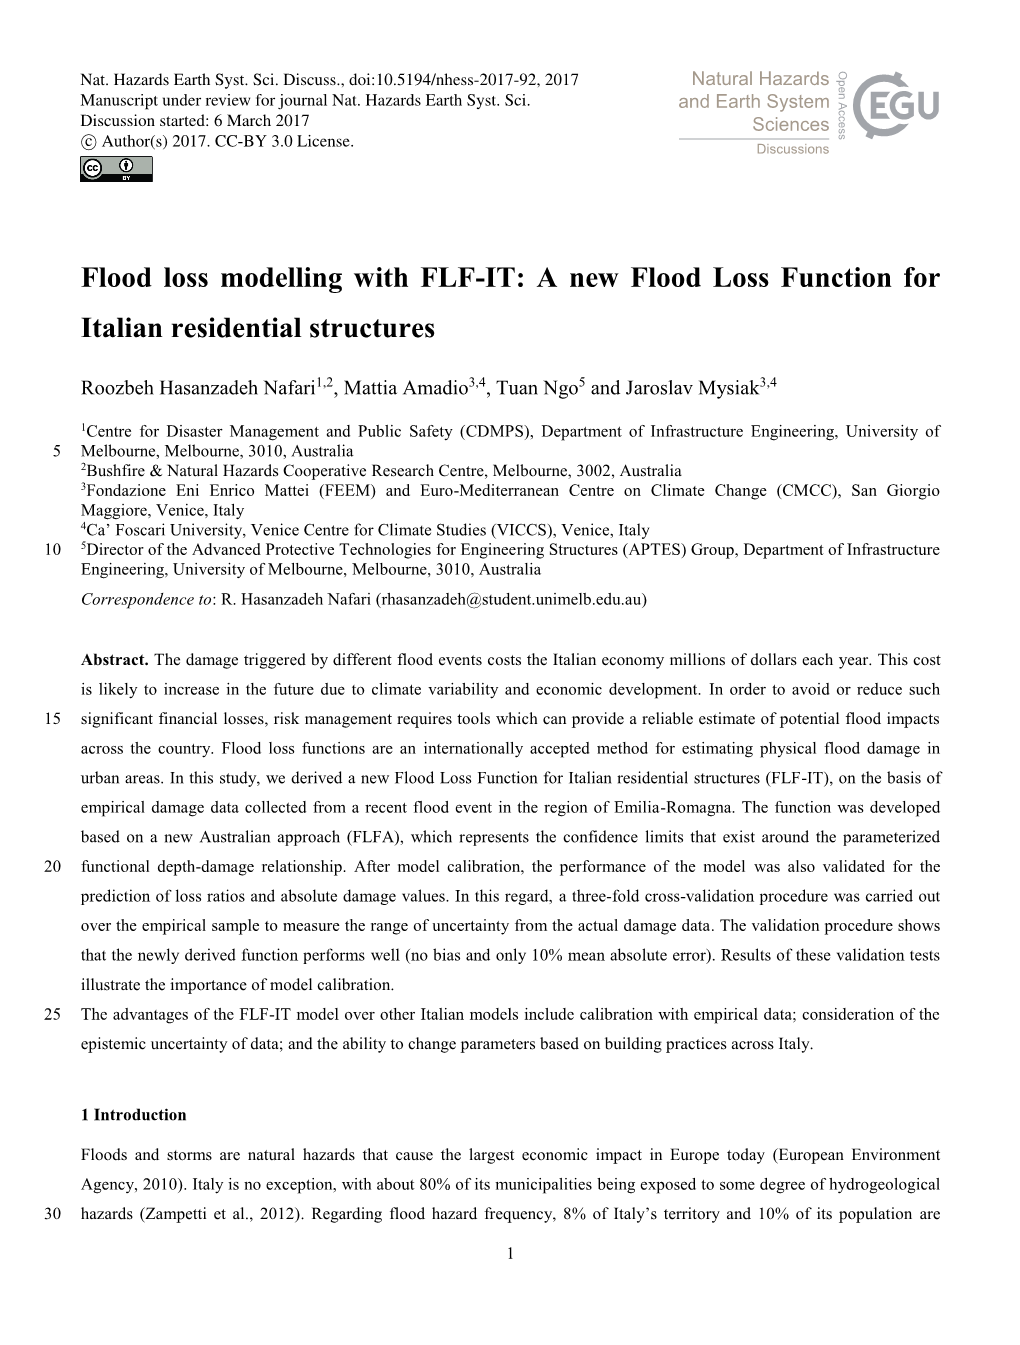 Flood Loss Modelling with FLF-IT: a New Flood Loss Function for Italian Residential Structures